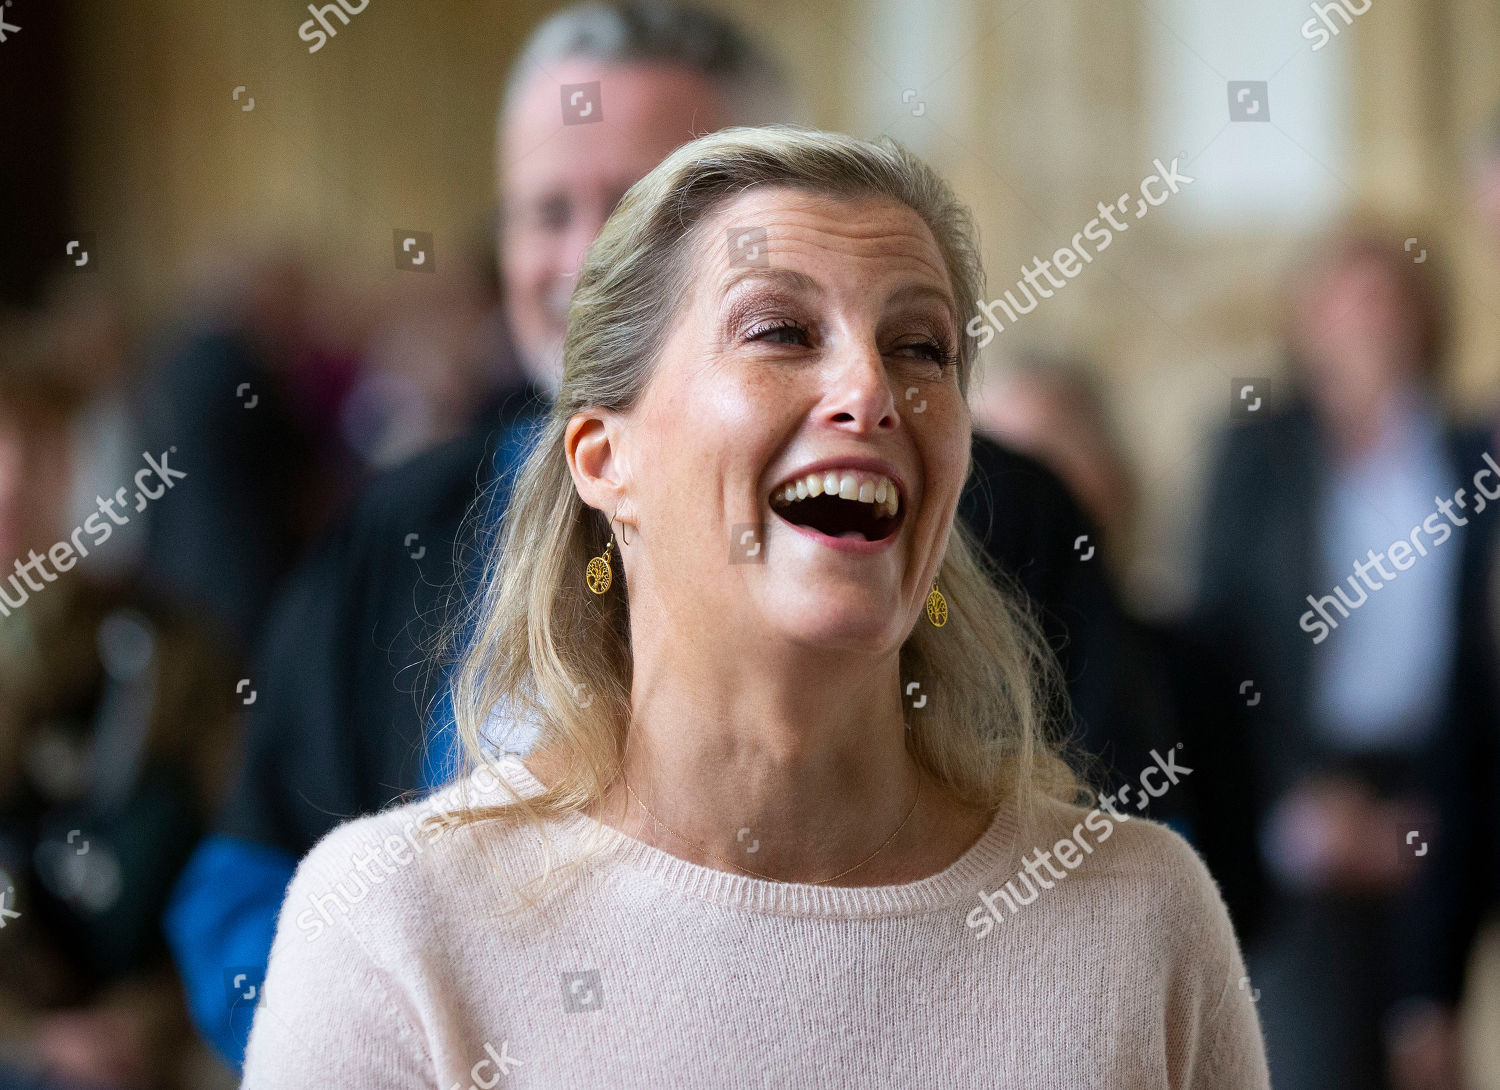 sophie-countess-of-wessex-visit-to-wells-cathedral-and-cathedral-school-somerset-uk-shutterstock-editorial-10422906j.jpg